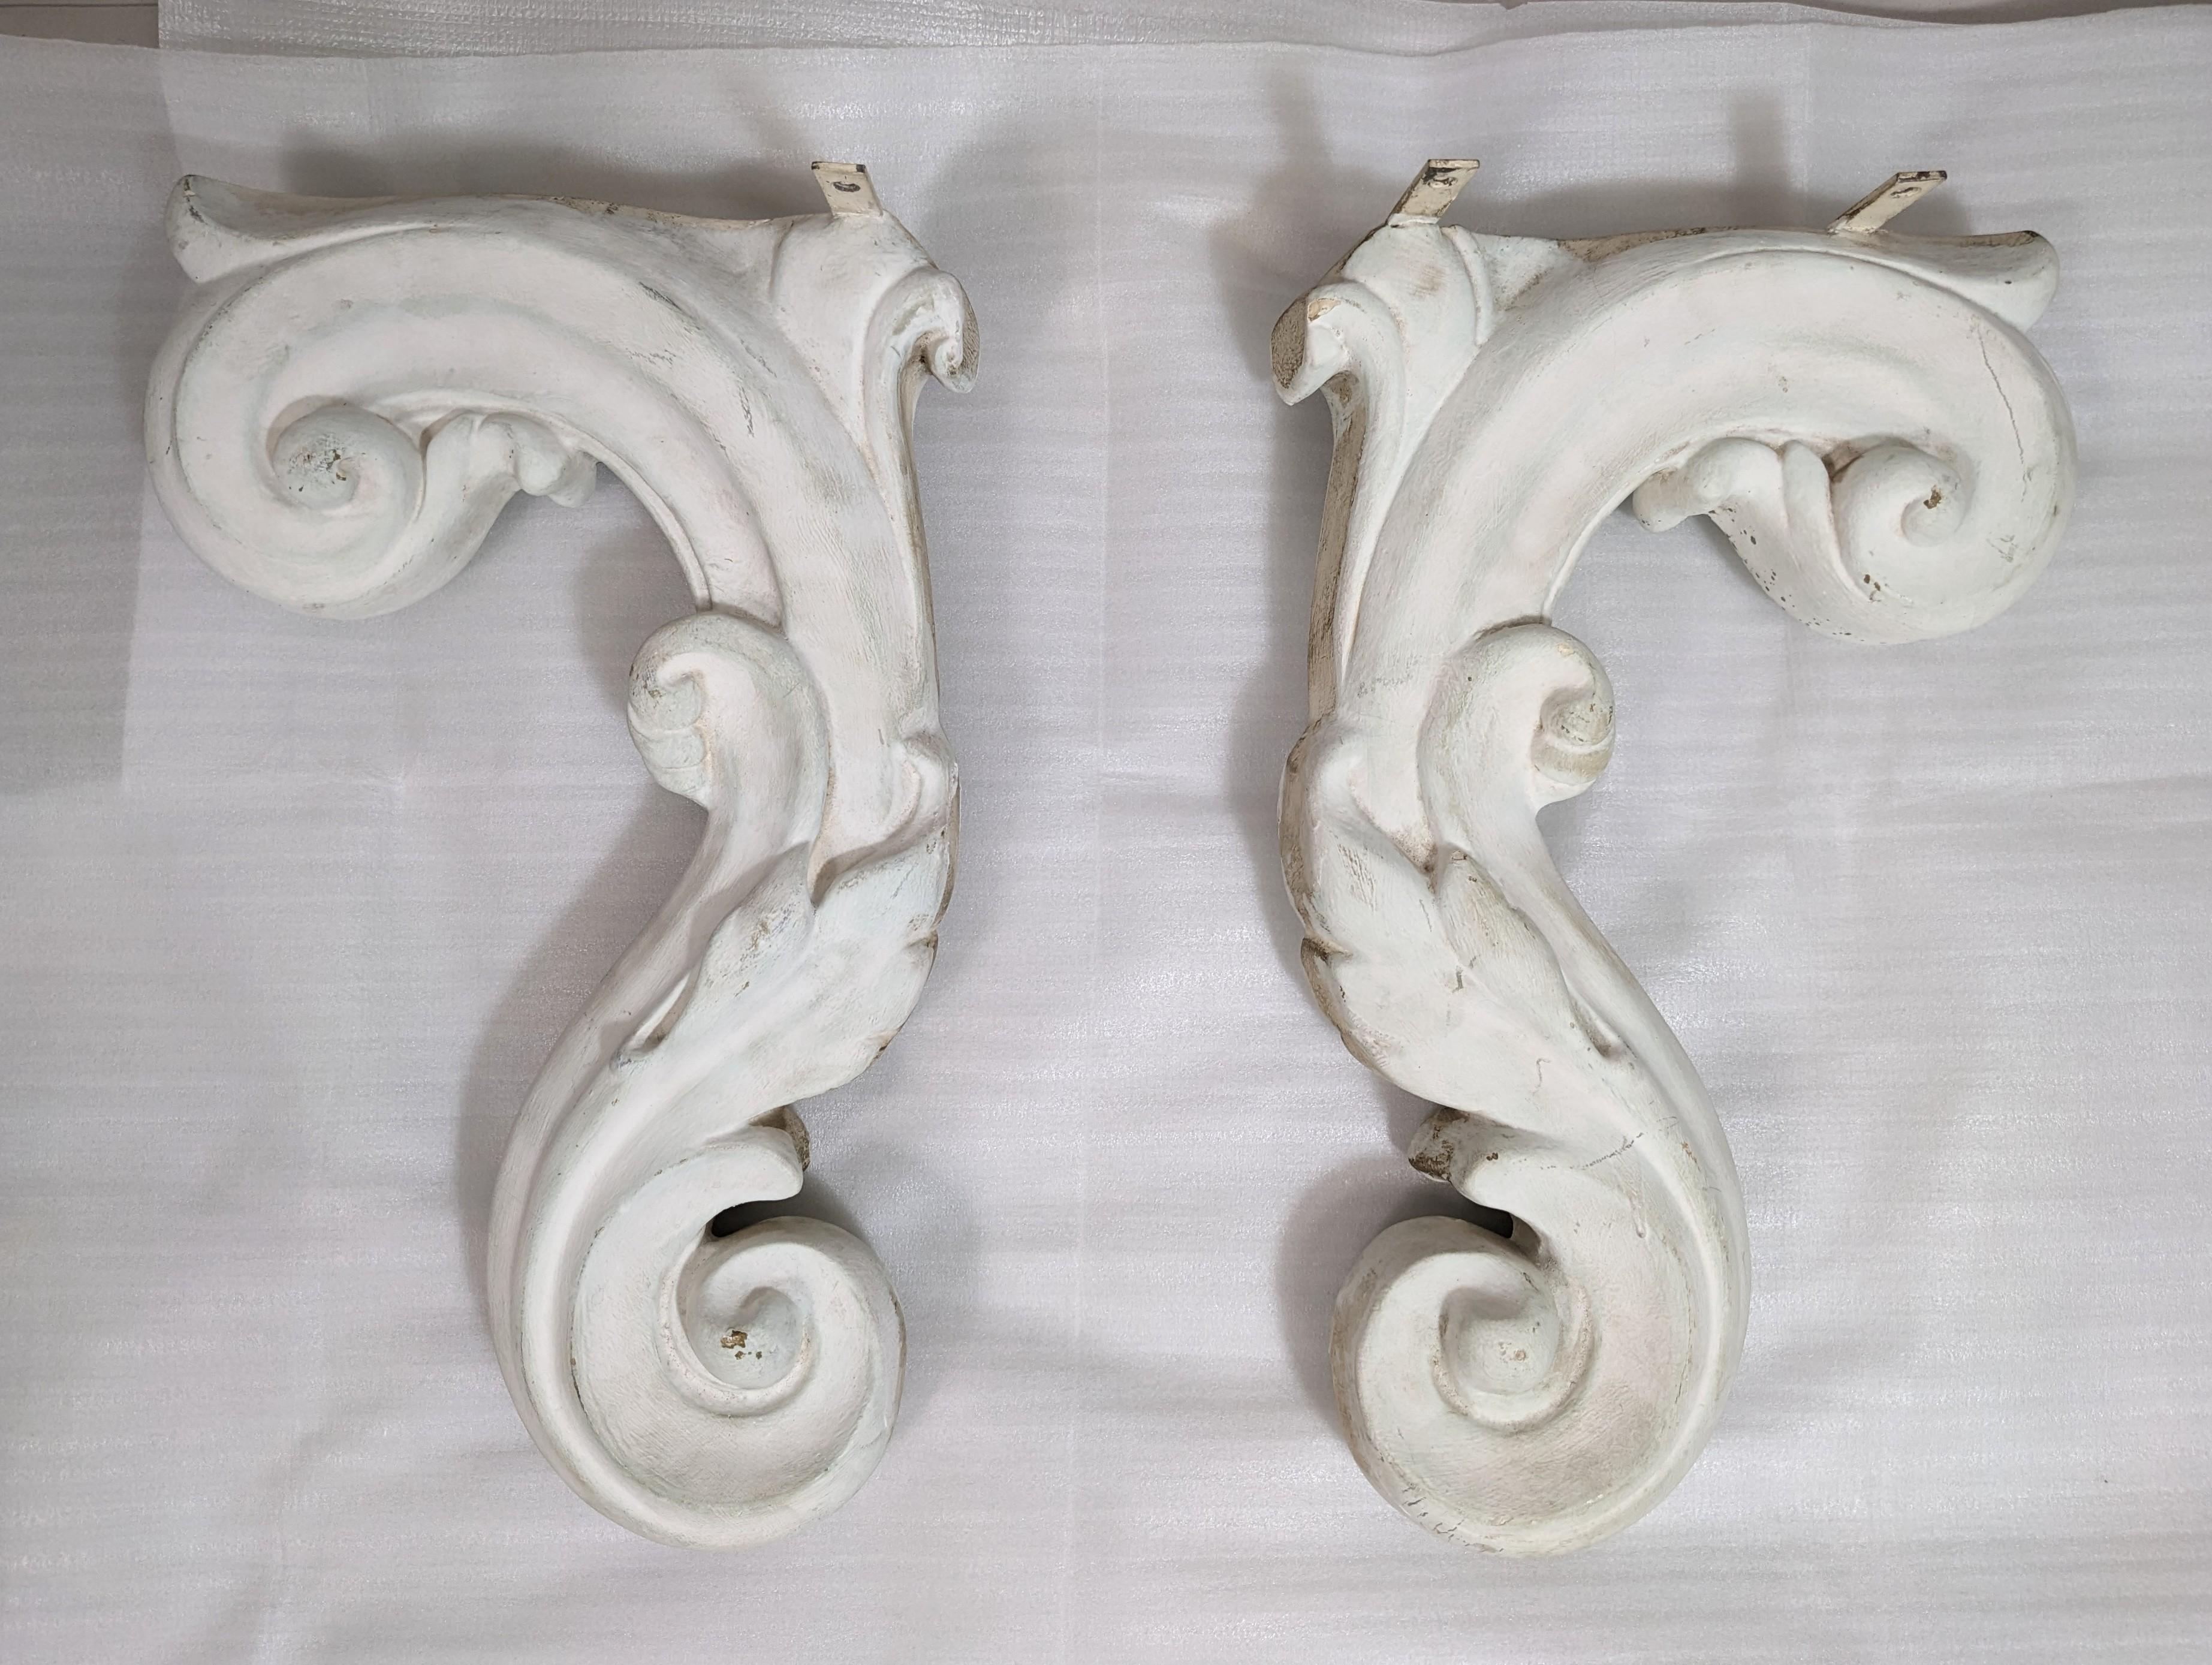 Pair of Elegant Mid Century Hollywood Regency Plaster Brackets in the Dorothy Draper style from the 1940's. Just needs a marble top to become an elegant shelf. 
17